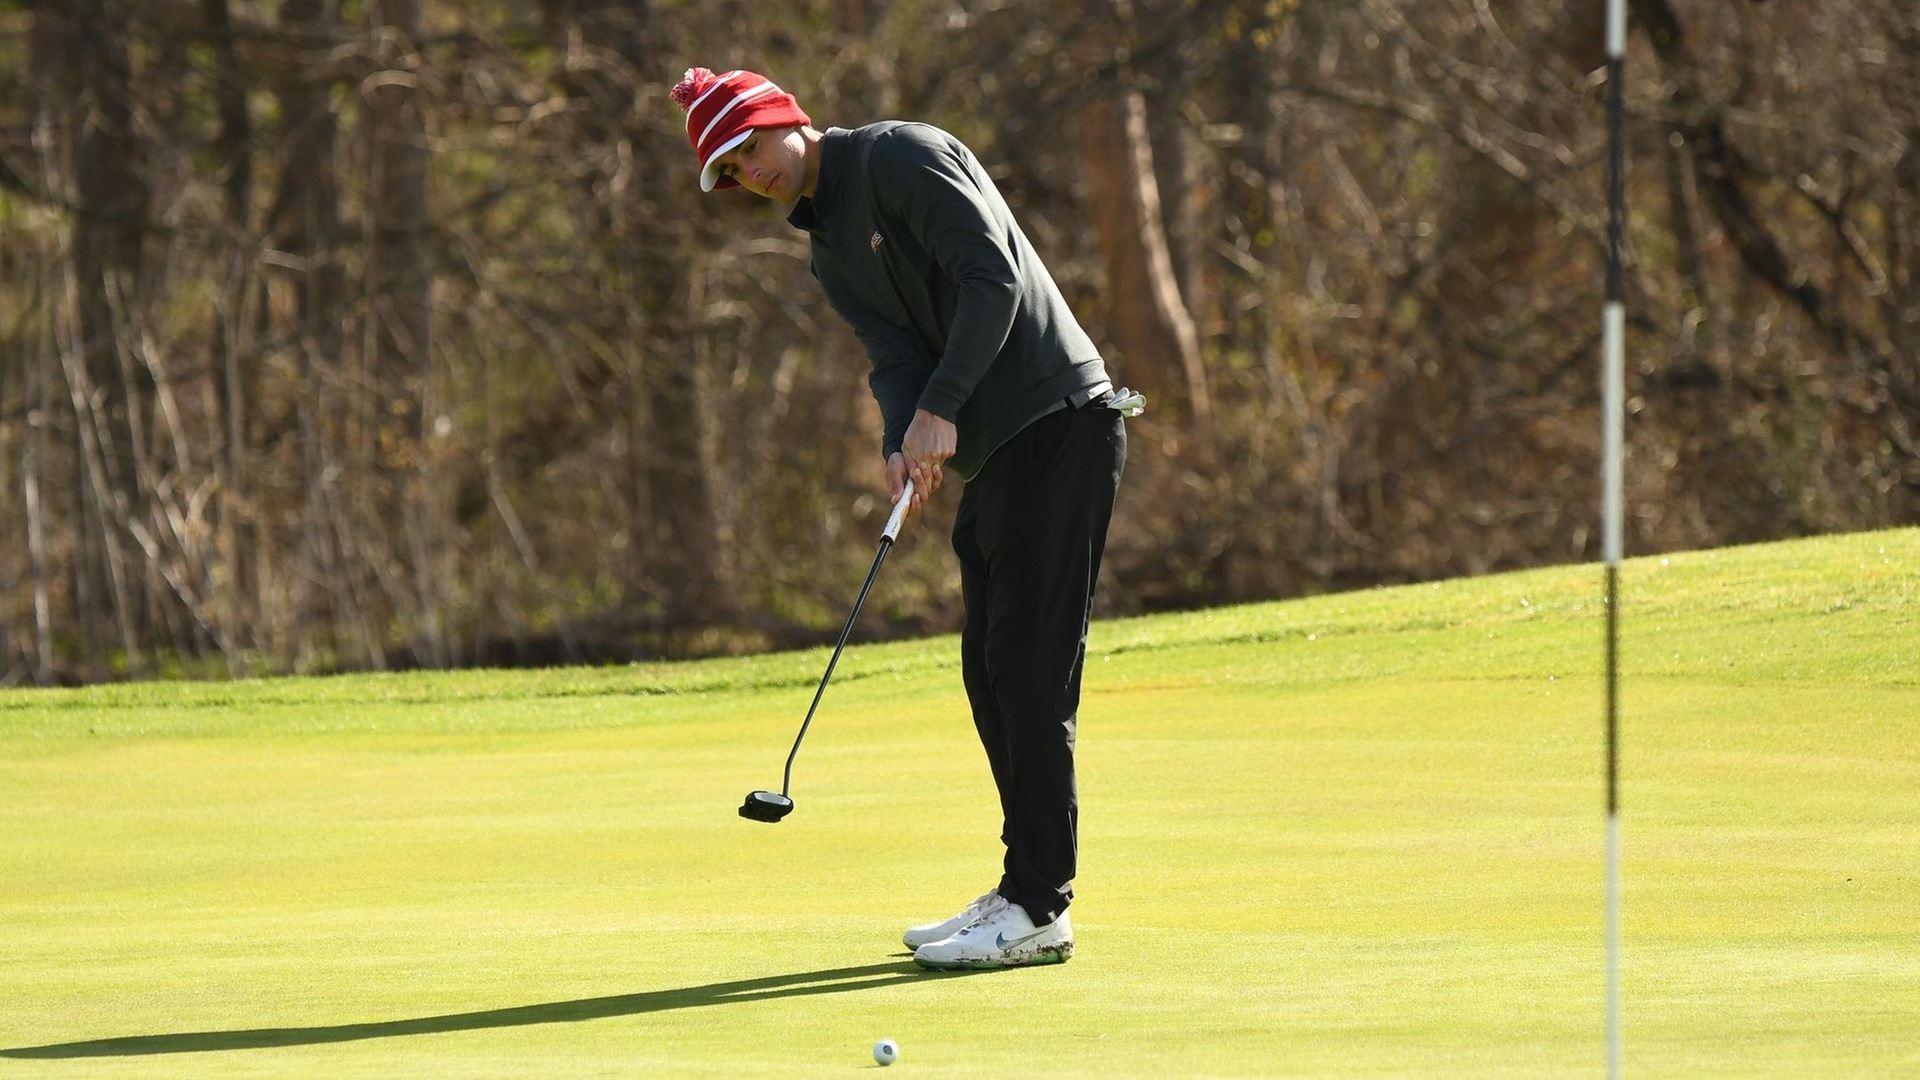 Foresters Win Own Invite by Nine Strokes